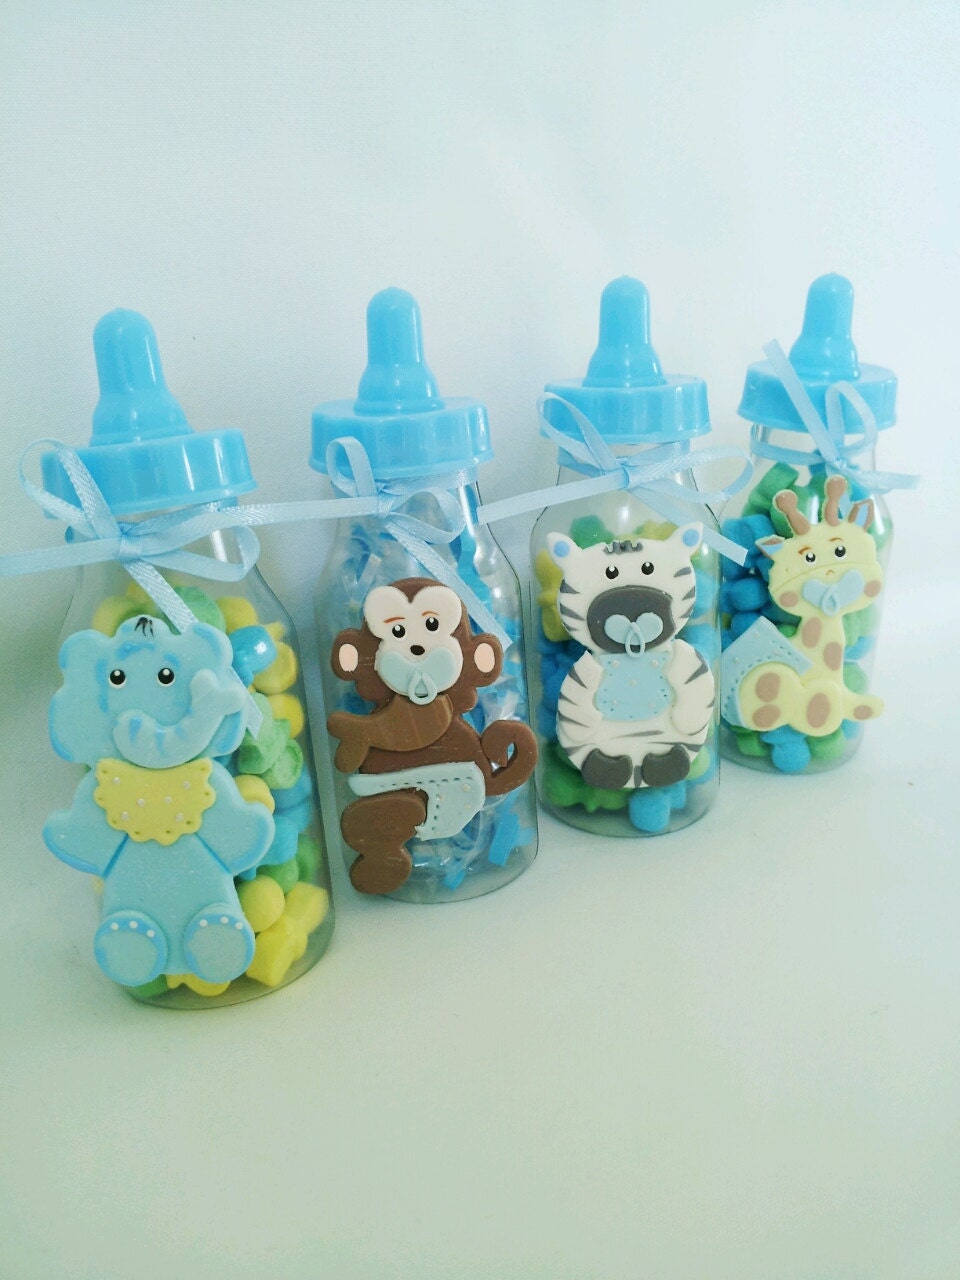 6 JUNGLE SAFARI party favor. Baby bottle by ForeverSweetfavors